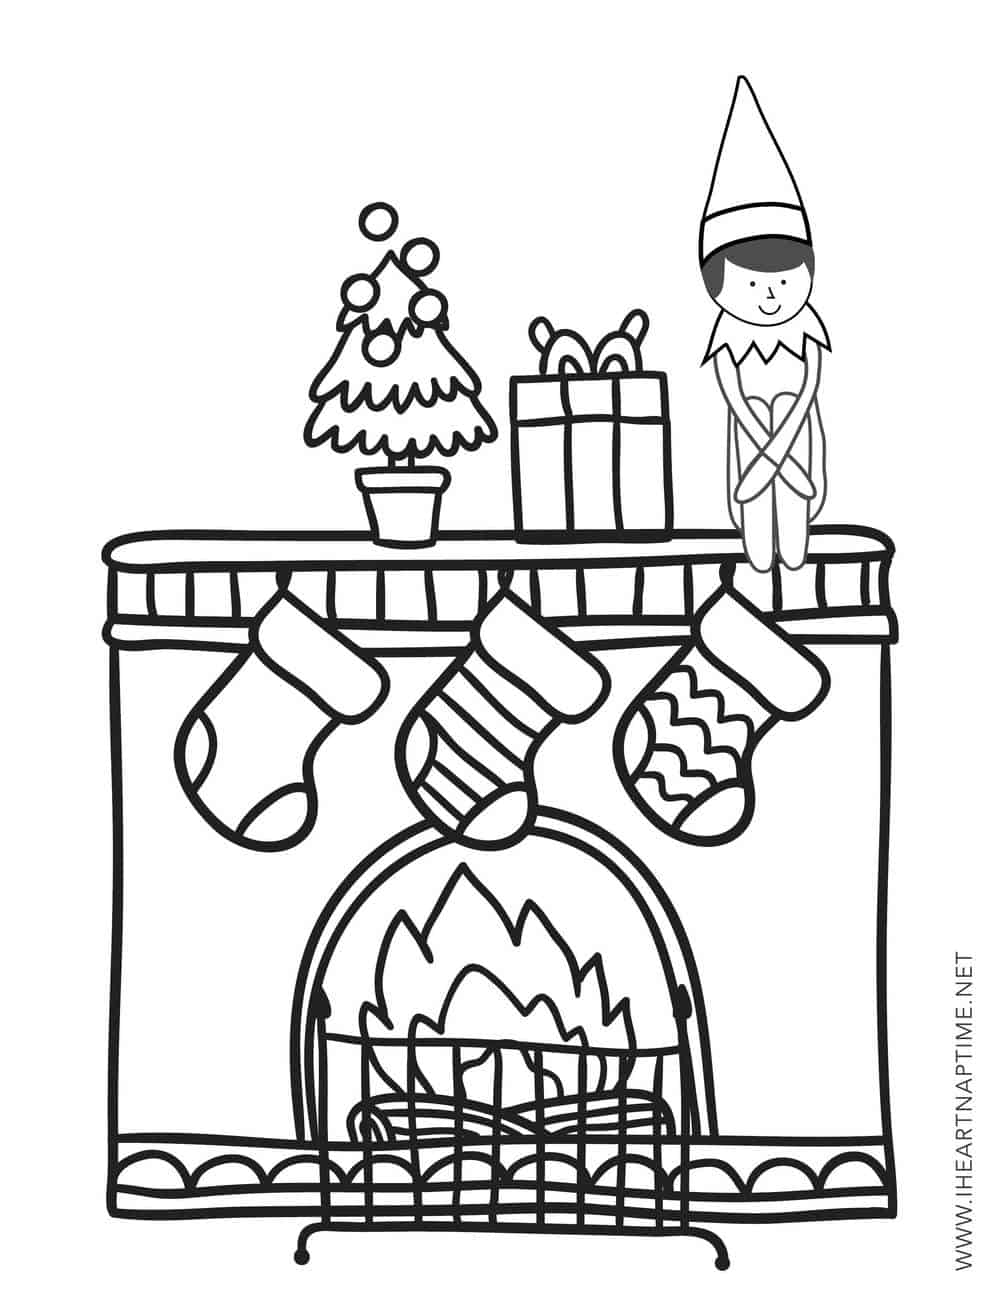 FREE Elf on the Shelf Coloring Pages   The Inspiration Board